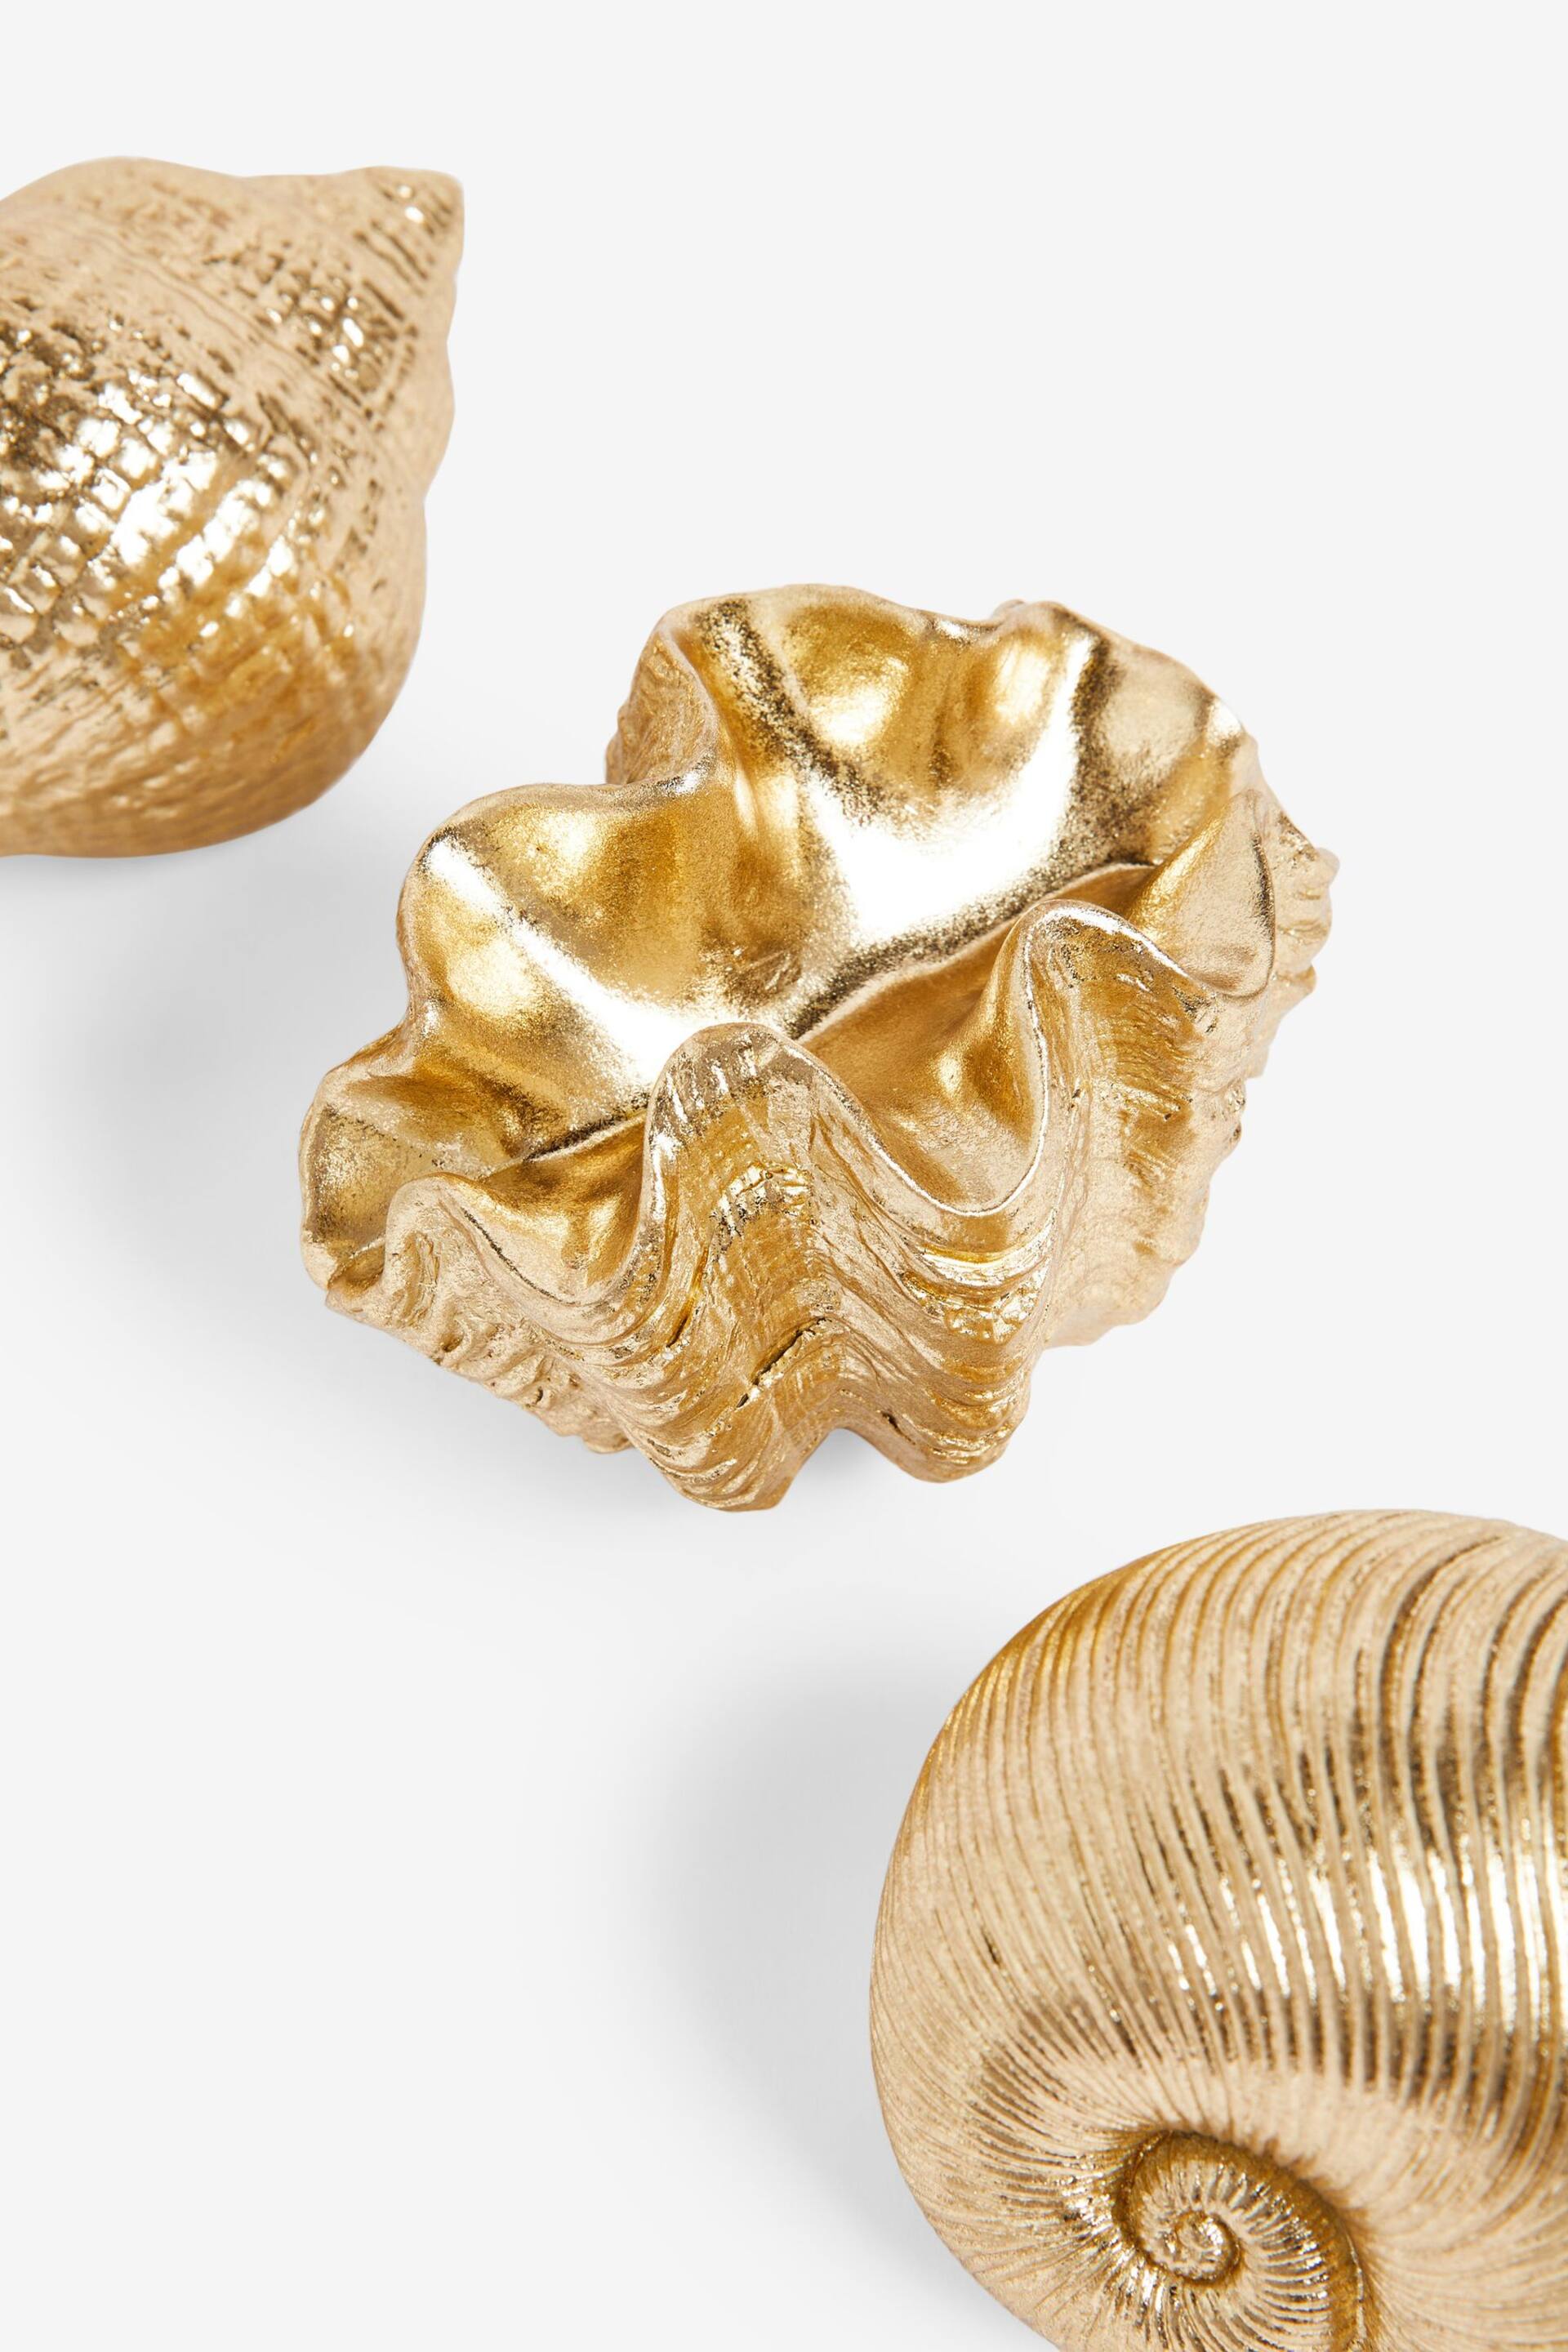 Set of 3 Gold Shell Ornaments - Image 2 of 5